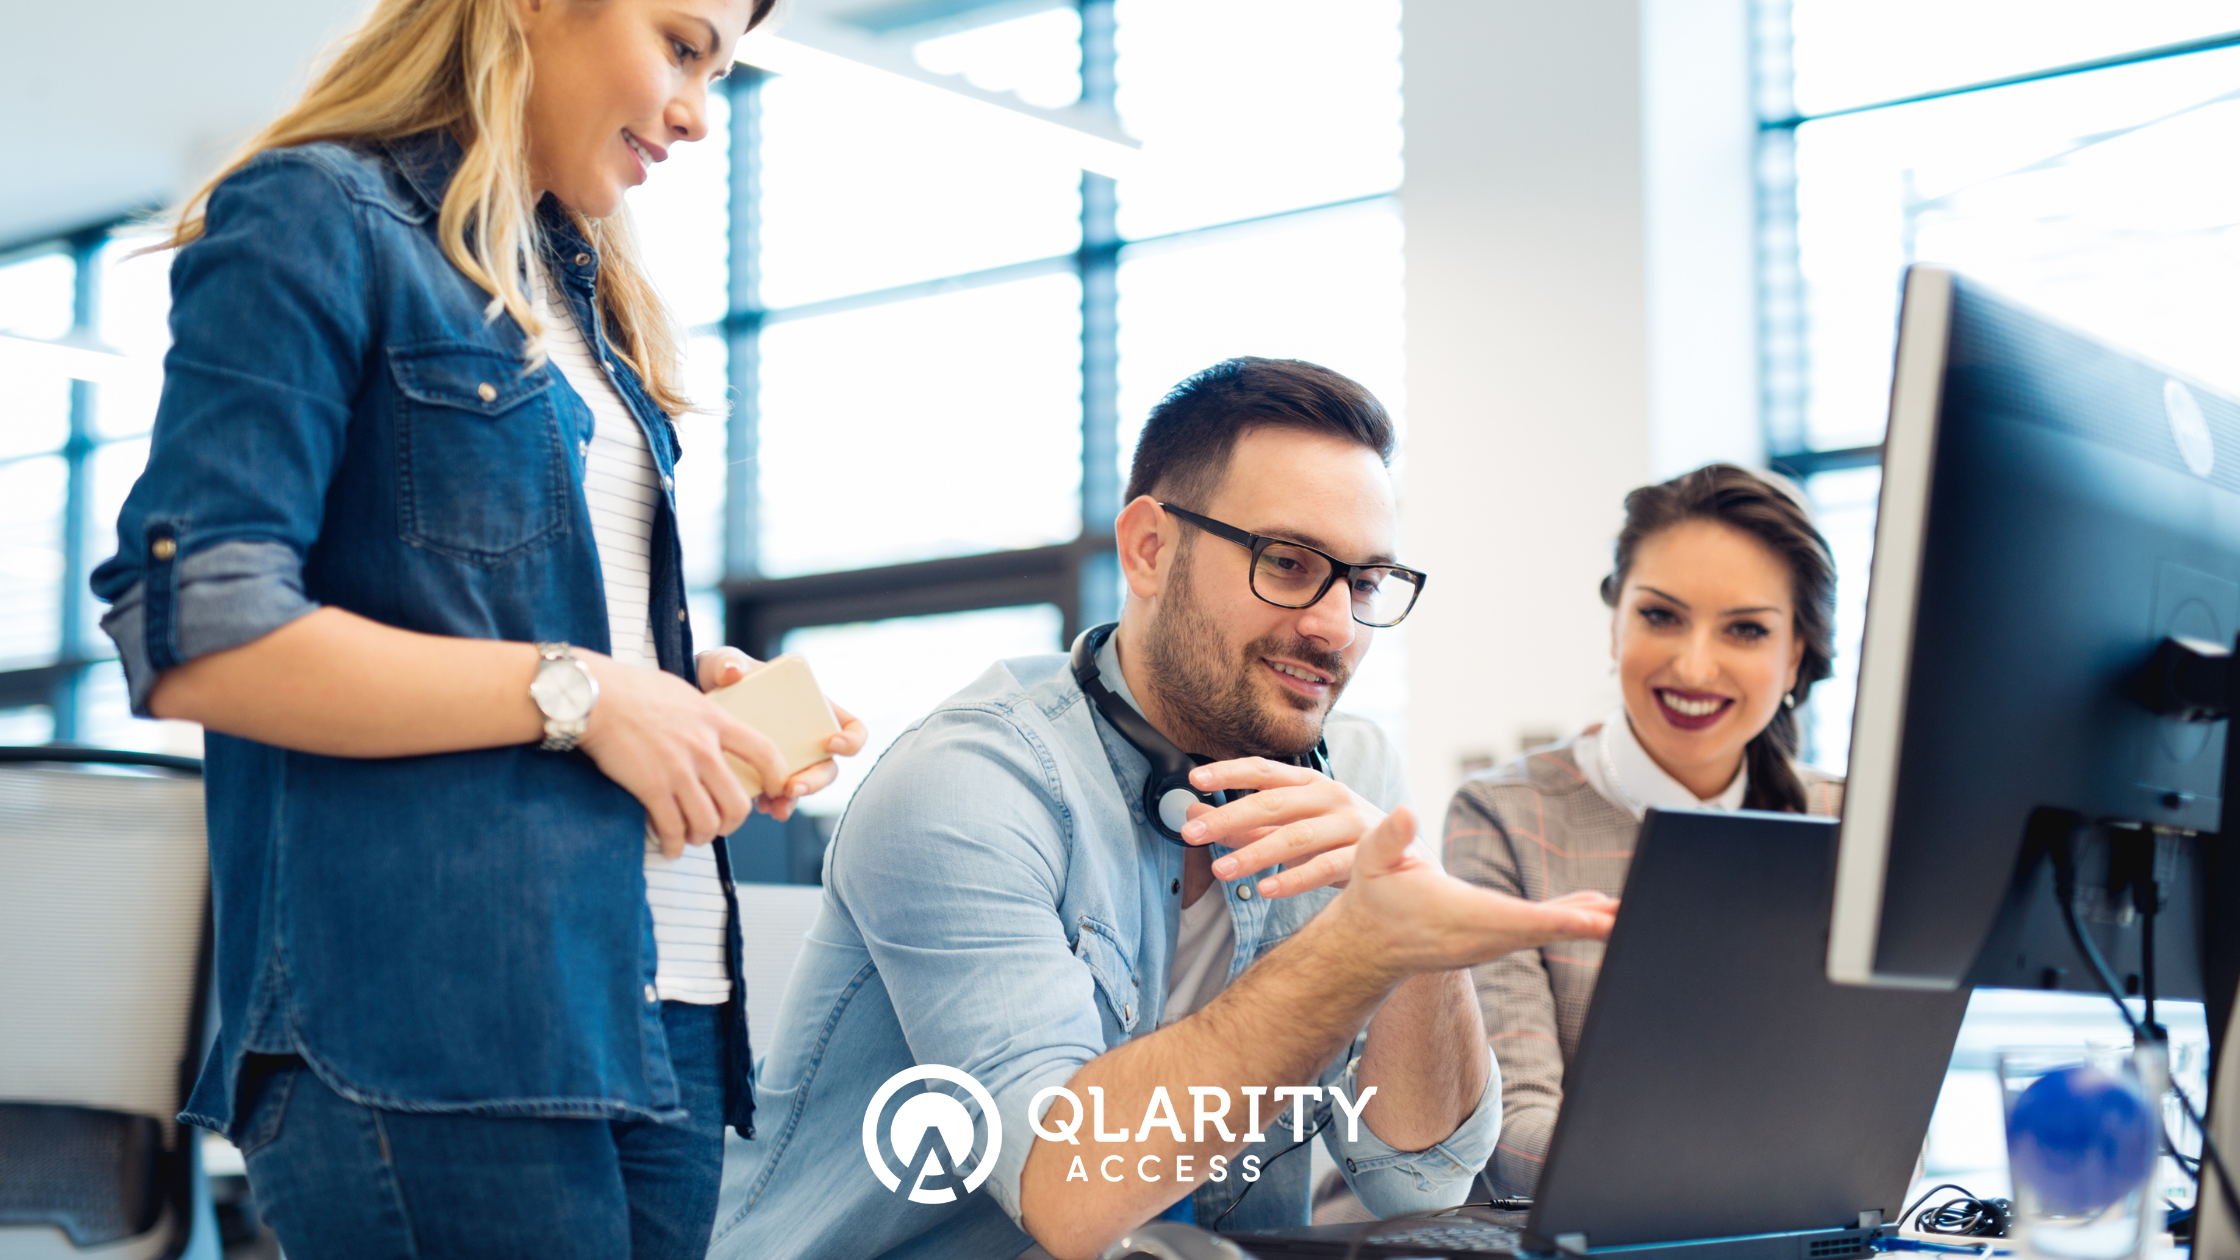 How Qlarity Access Can Boost Business Growth